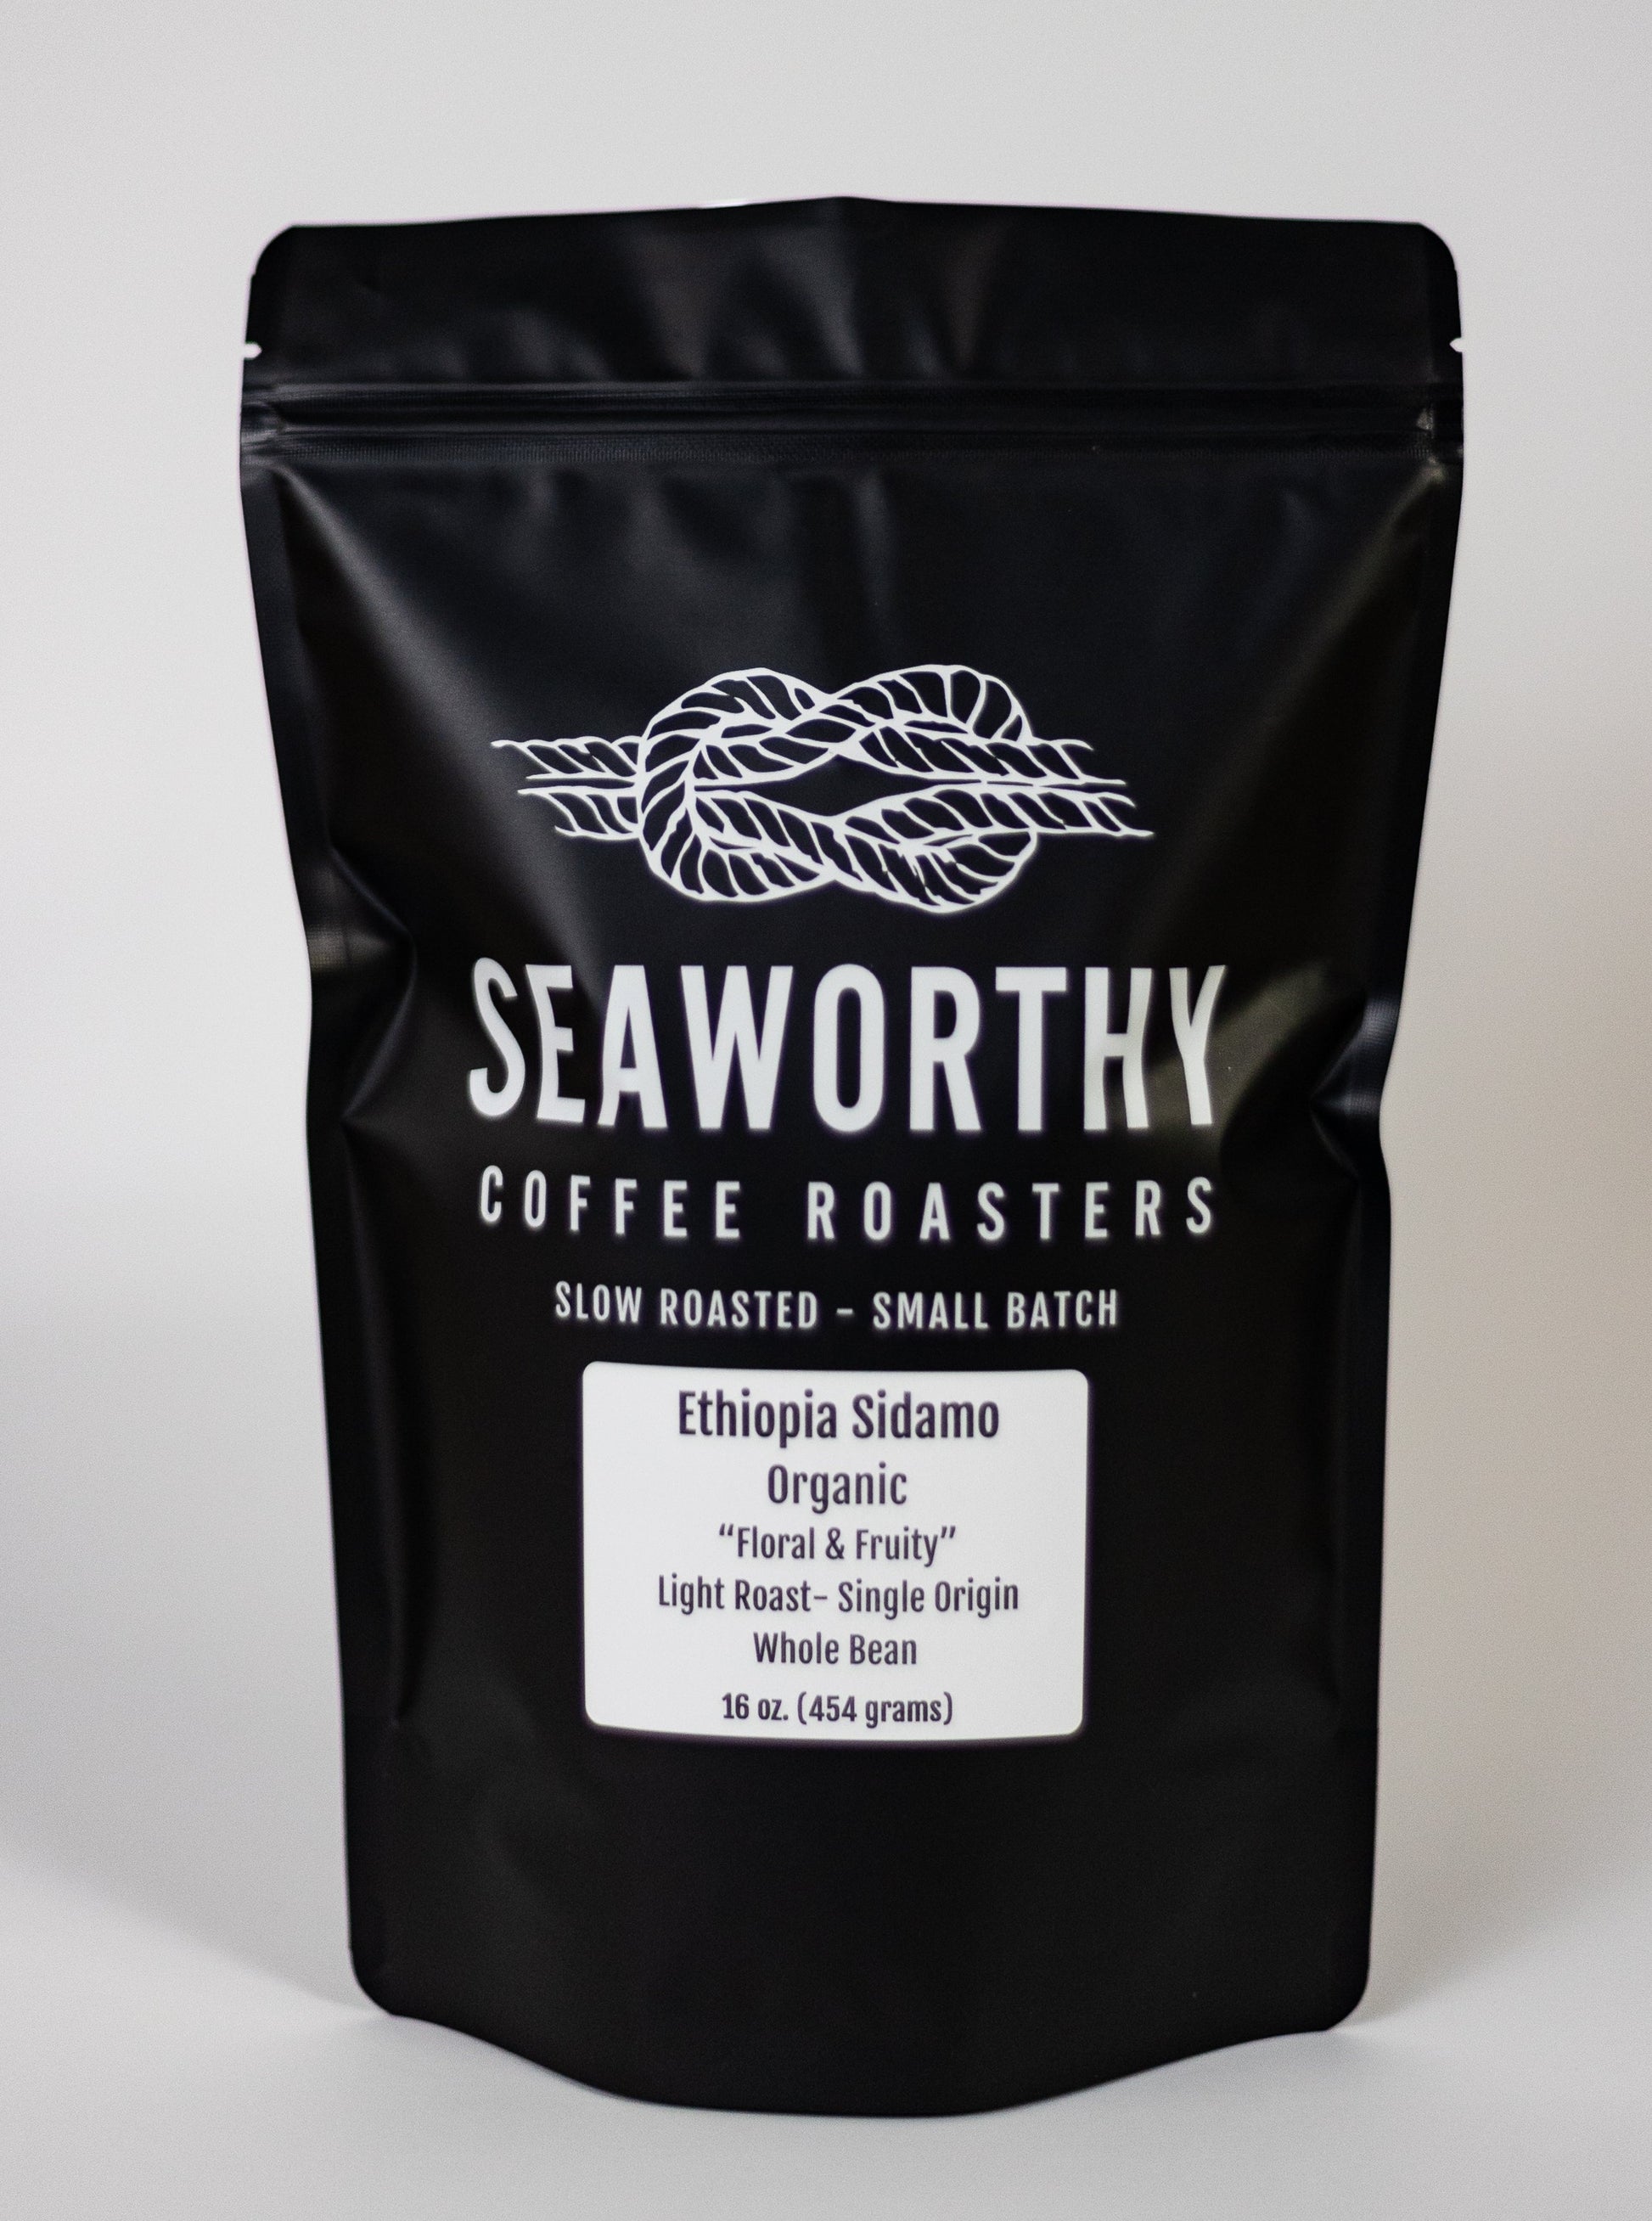 Seaworthy slow roasted, small batch coffee. Experience the flavor notes of caramel and citrus fruits, with bright acidity and a full body. Perfectly balanced with a lovely aroma from the first to last sip. Since this coffee is roasted light, there is a higher concentration of caffeine, making this a great way to start your day!